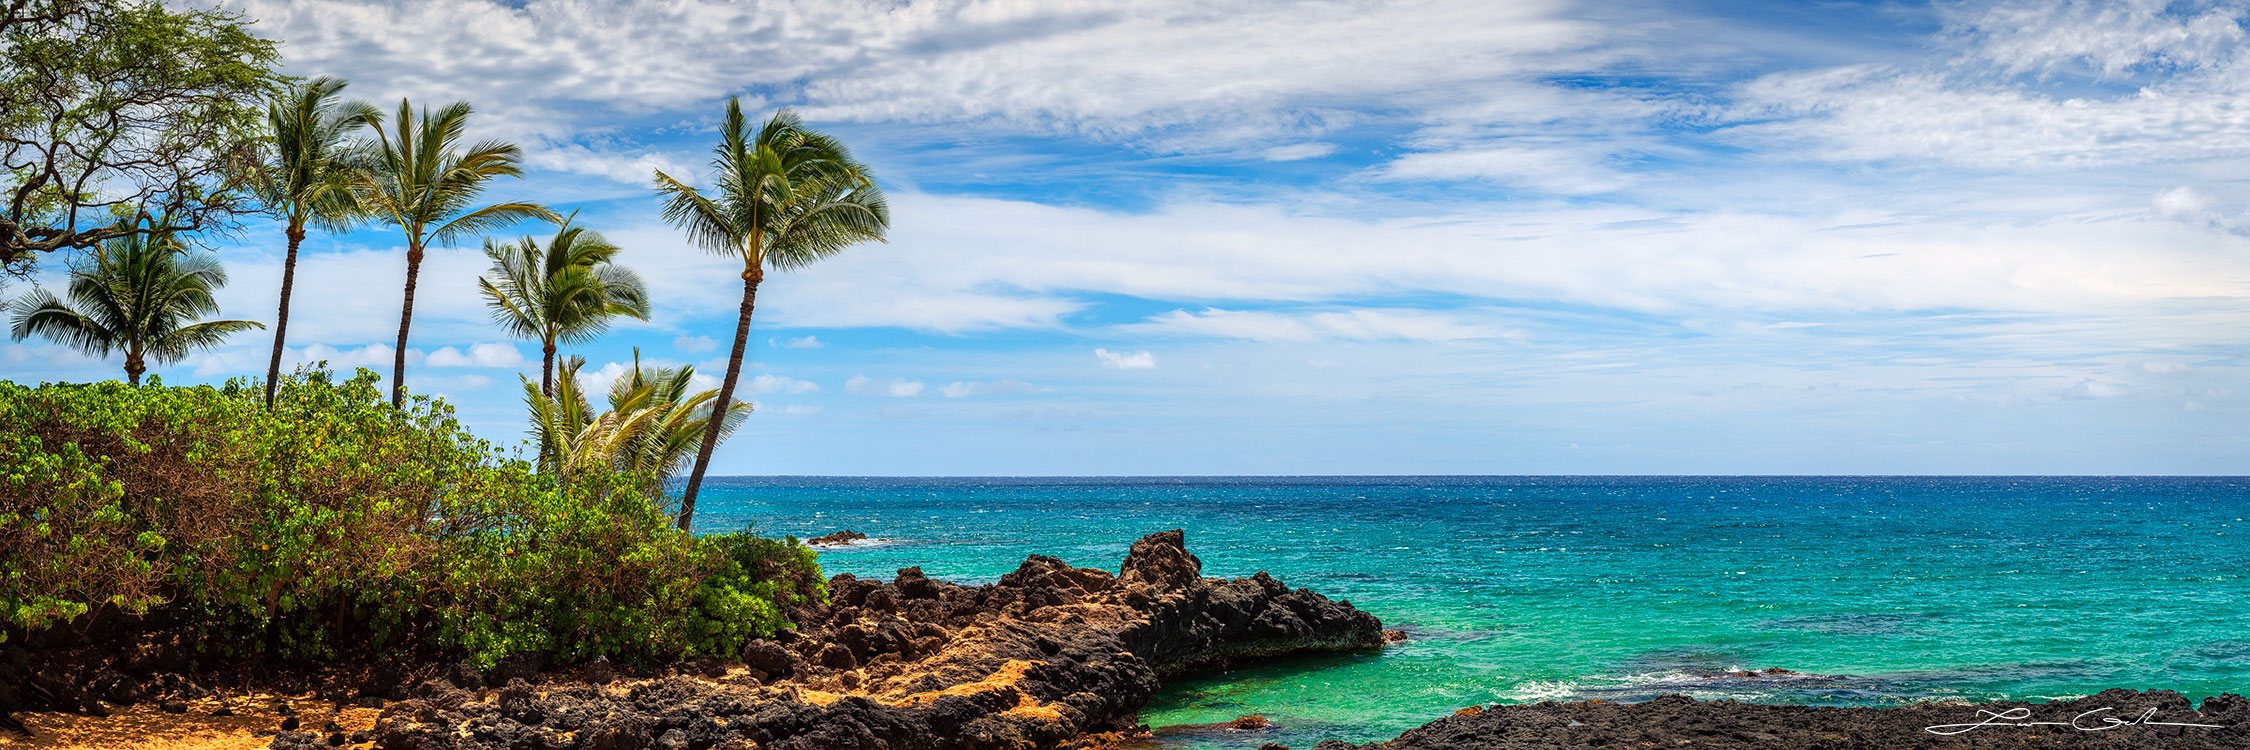 Panoramic shot of a serene beach shore in Maui with turquoise ocean, rocky lava shore with sand and palm trees under a blue sky with white clouds - Gintchin Fine Art.